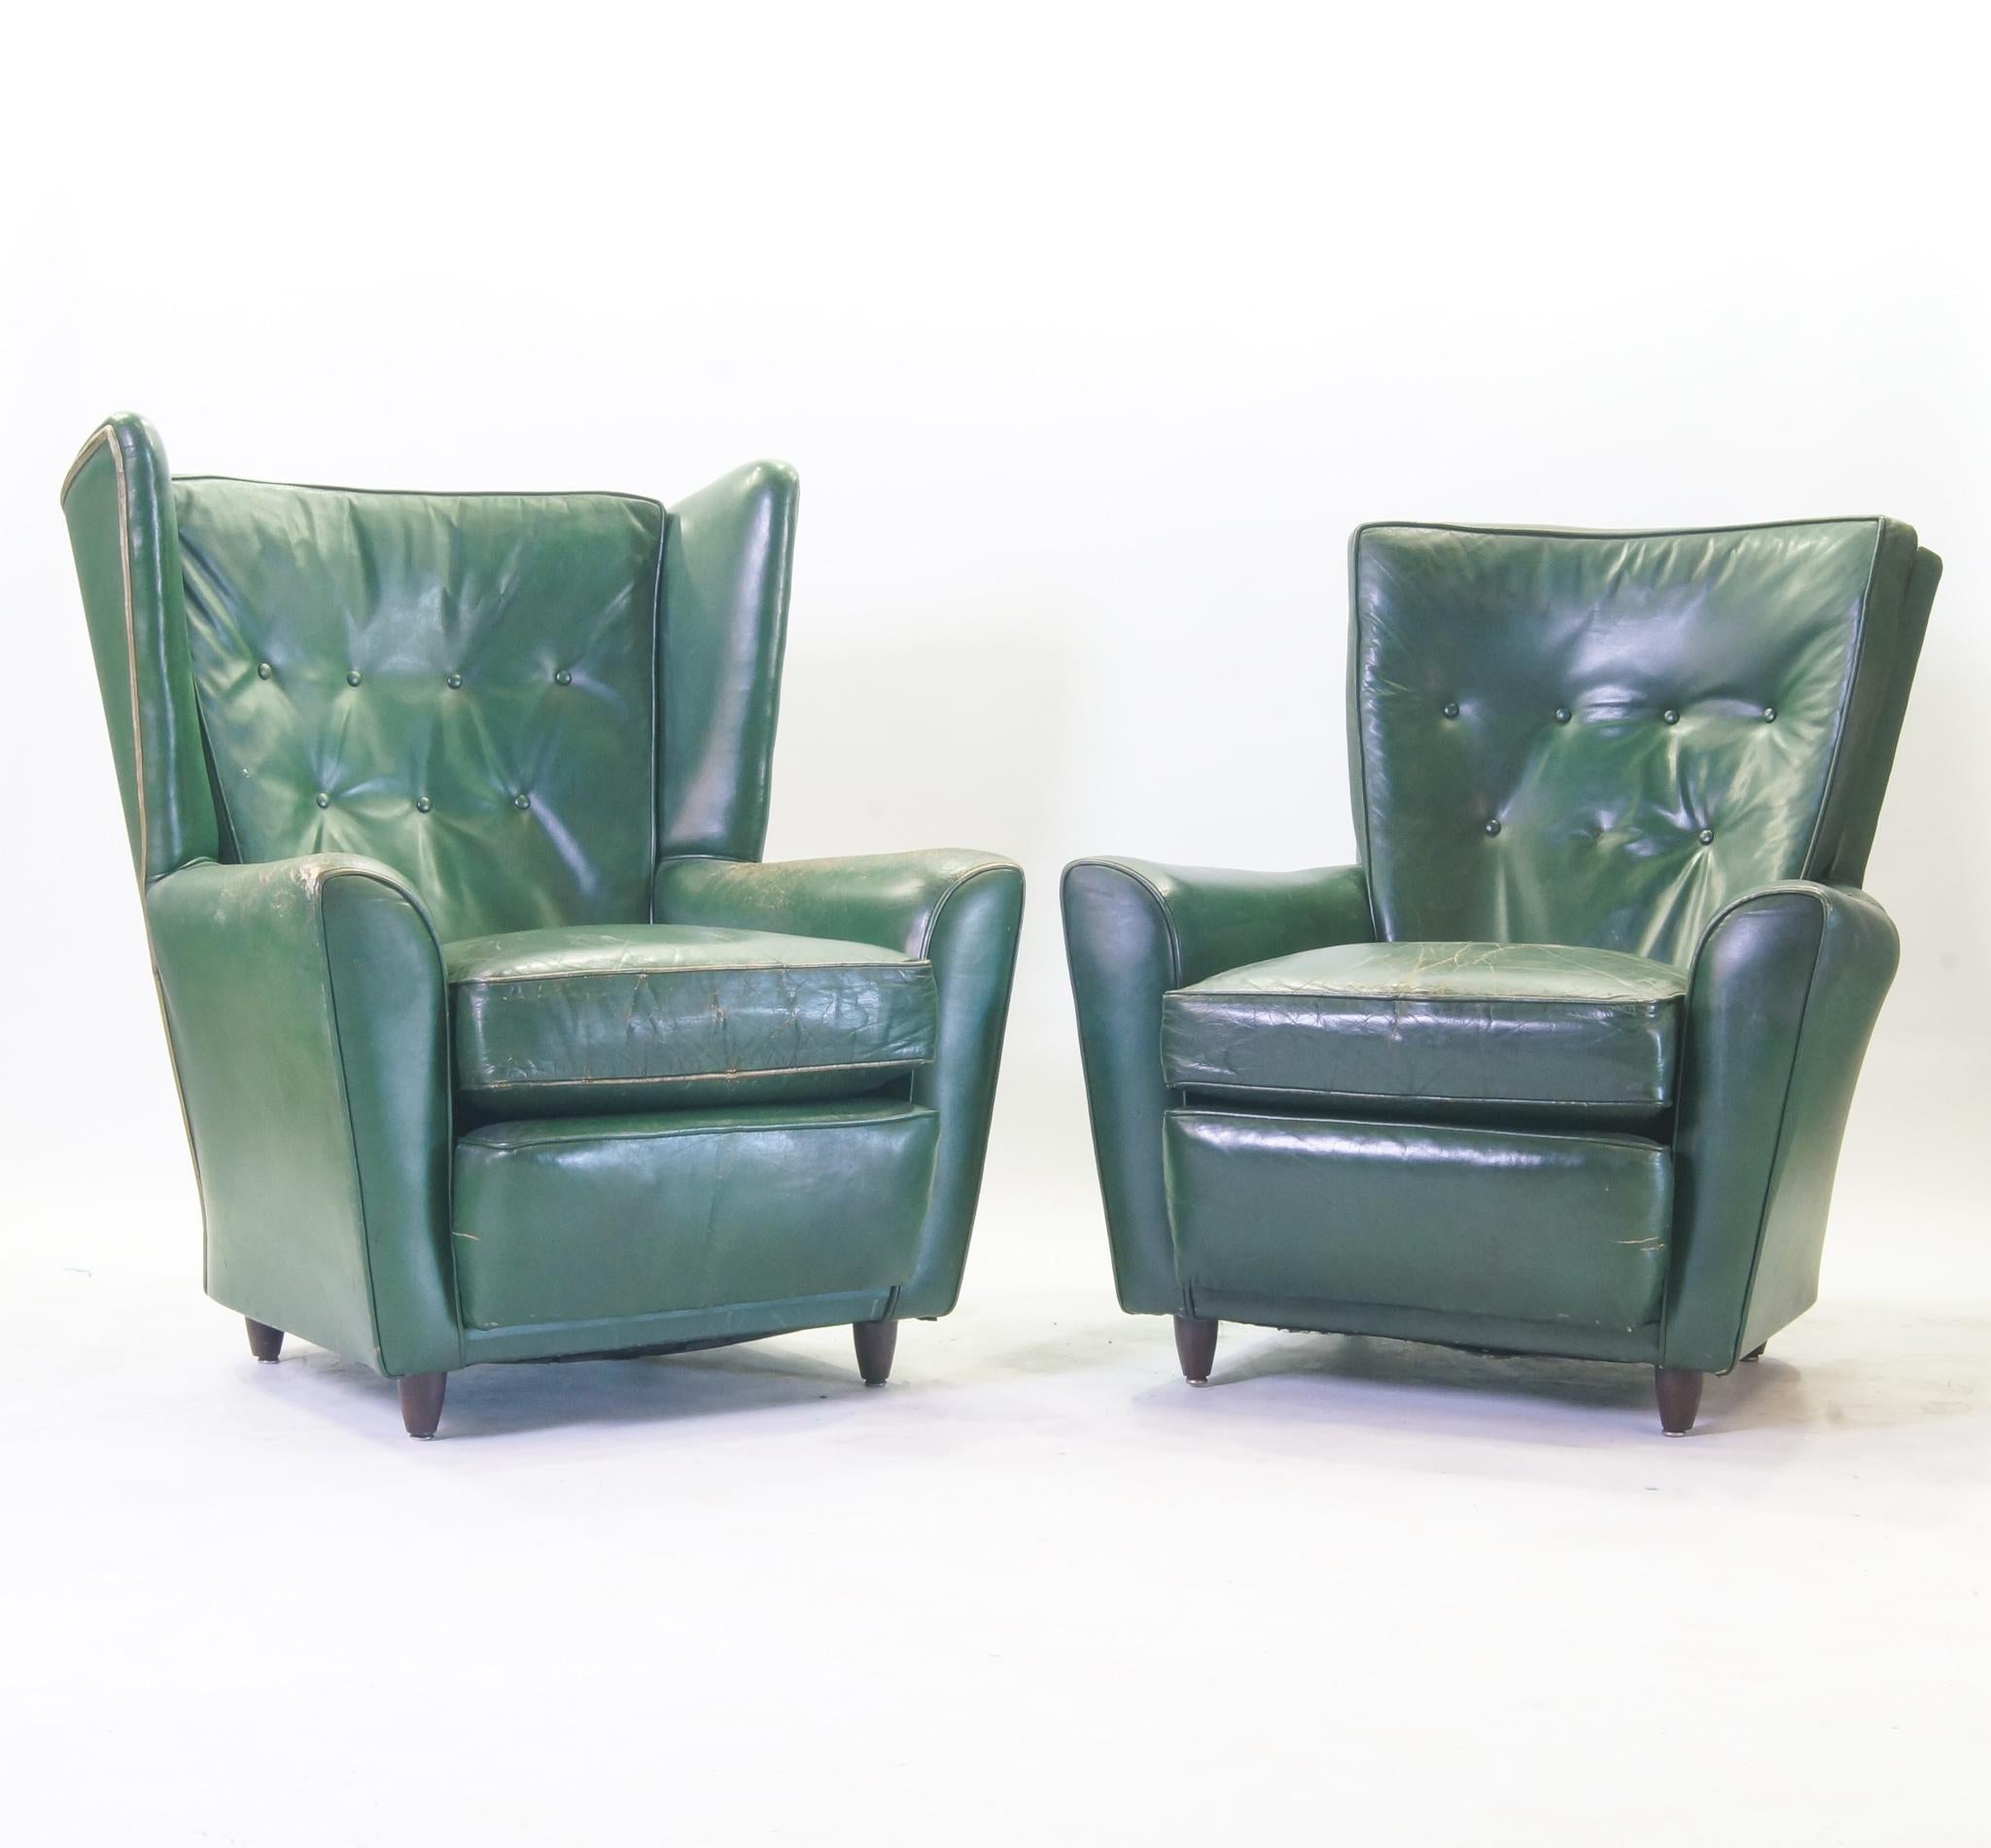 Green leather Raw club chairs - set of 2

Denmark, 1940's
Authentic green leather chairs. With characteristic patine wich makes this fauteuill ideal for the gastronomy branch or in front of your library. Patine all over, so in good vintage- and